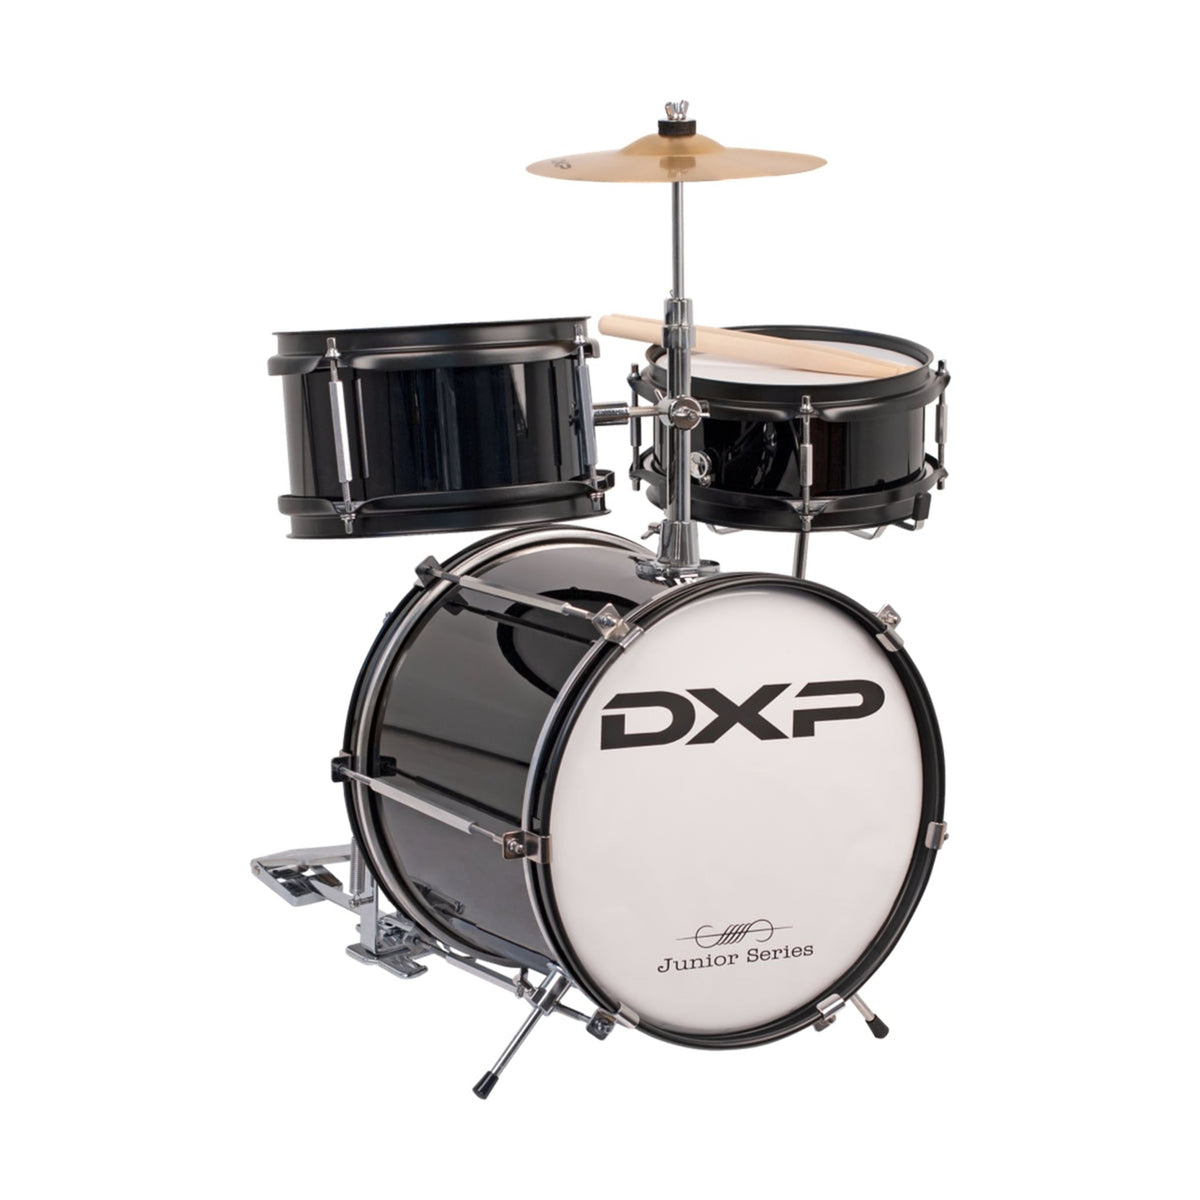 DXP Junior Drum Kit features a 12&quot;x10&quot; Bass Drum, 8&quot;x4 1/2&quot; Tom Tom 8&quot; x 3 1/2&quot; Snare drum on stand, 8&quot; Cymbal Bass and drum pedal. It is perfect for the youngest of drummers. 